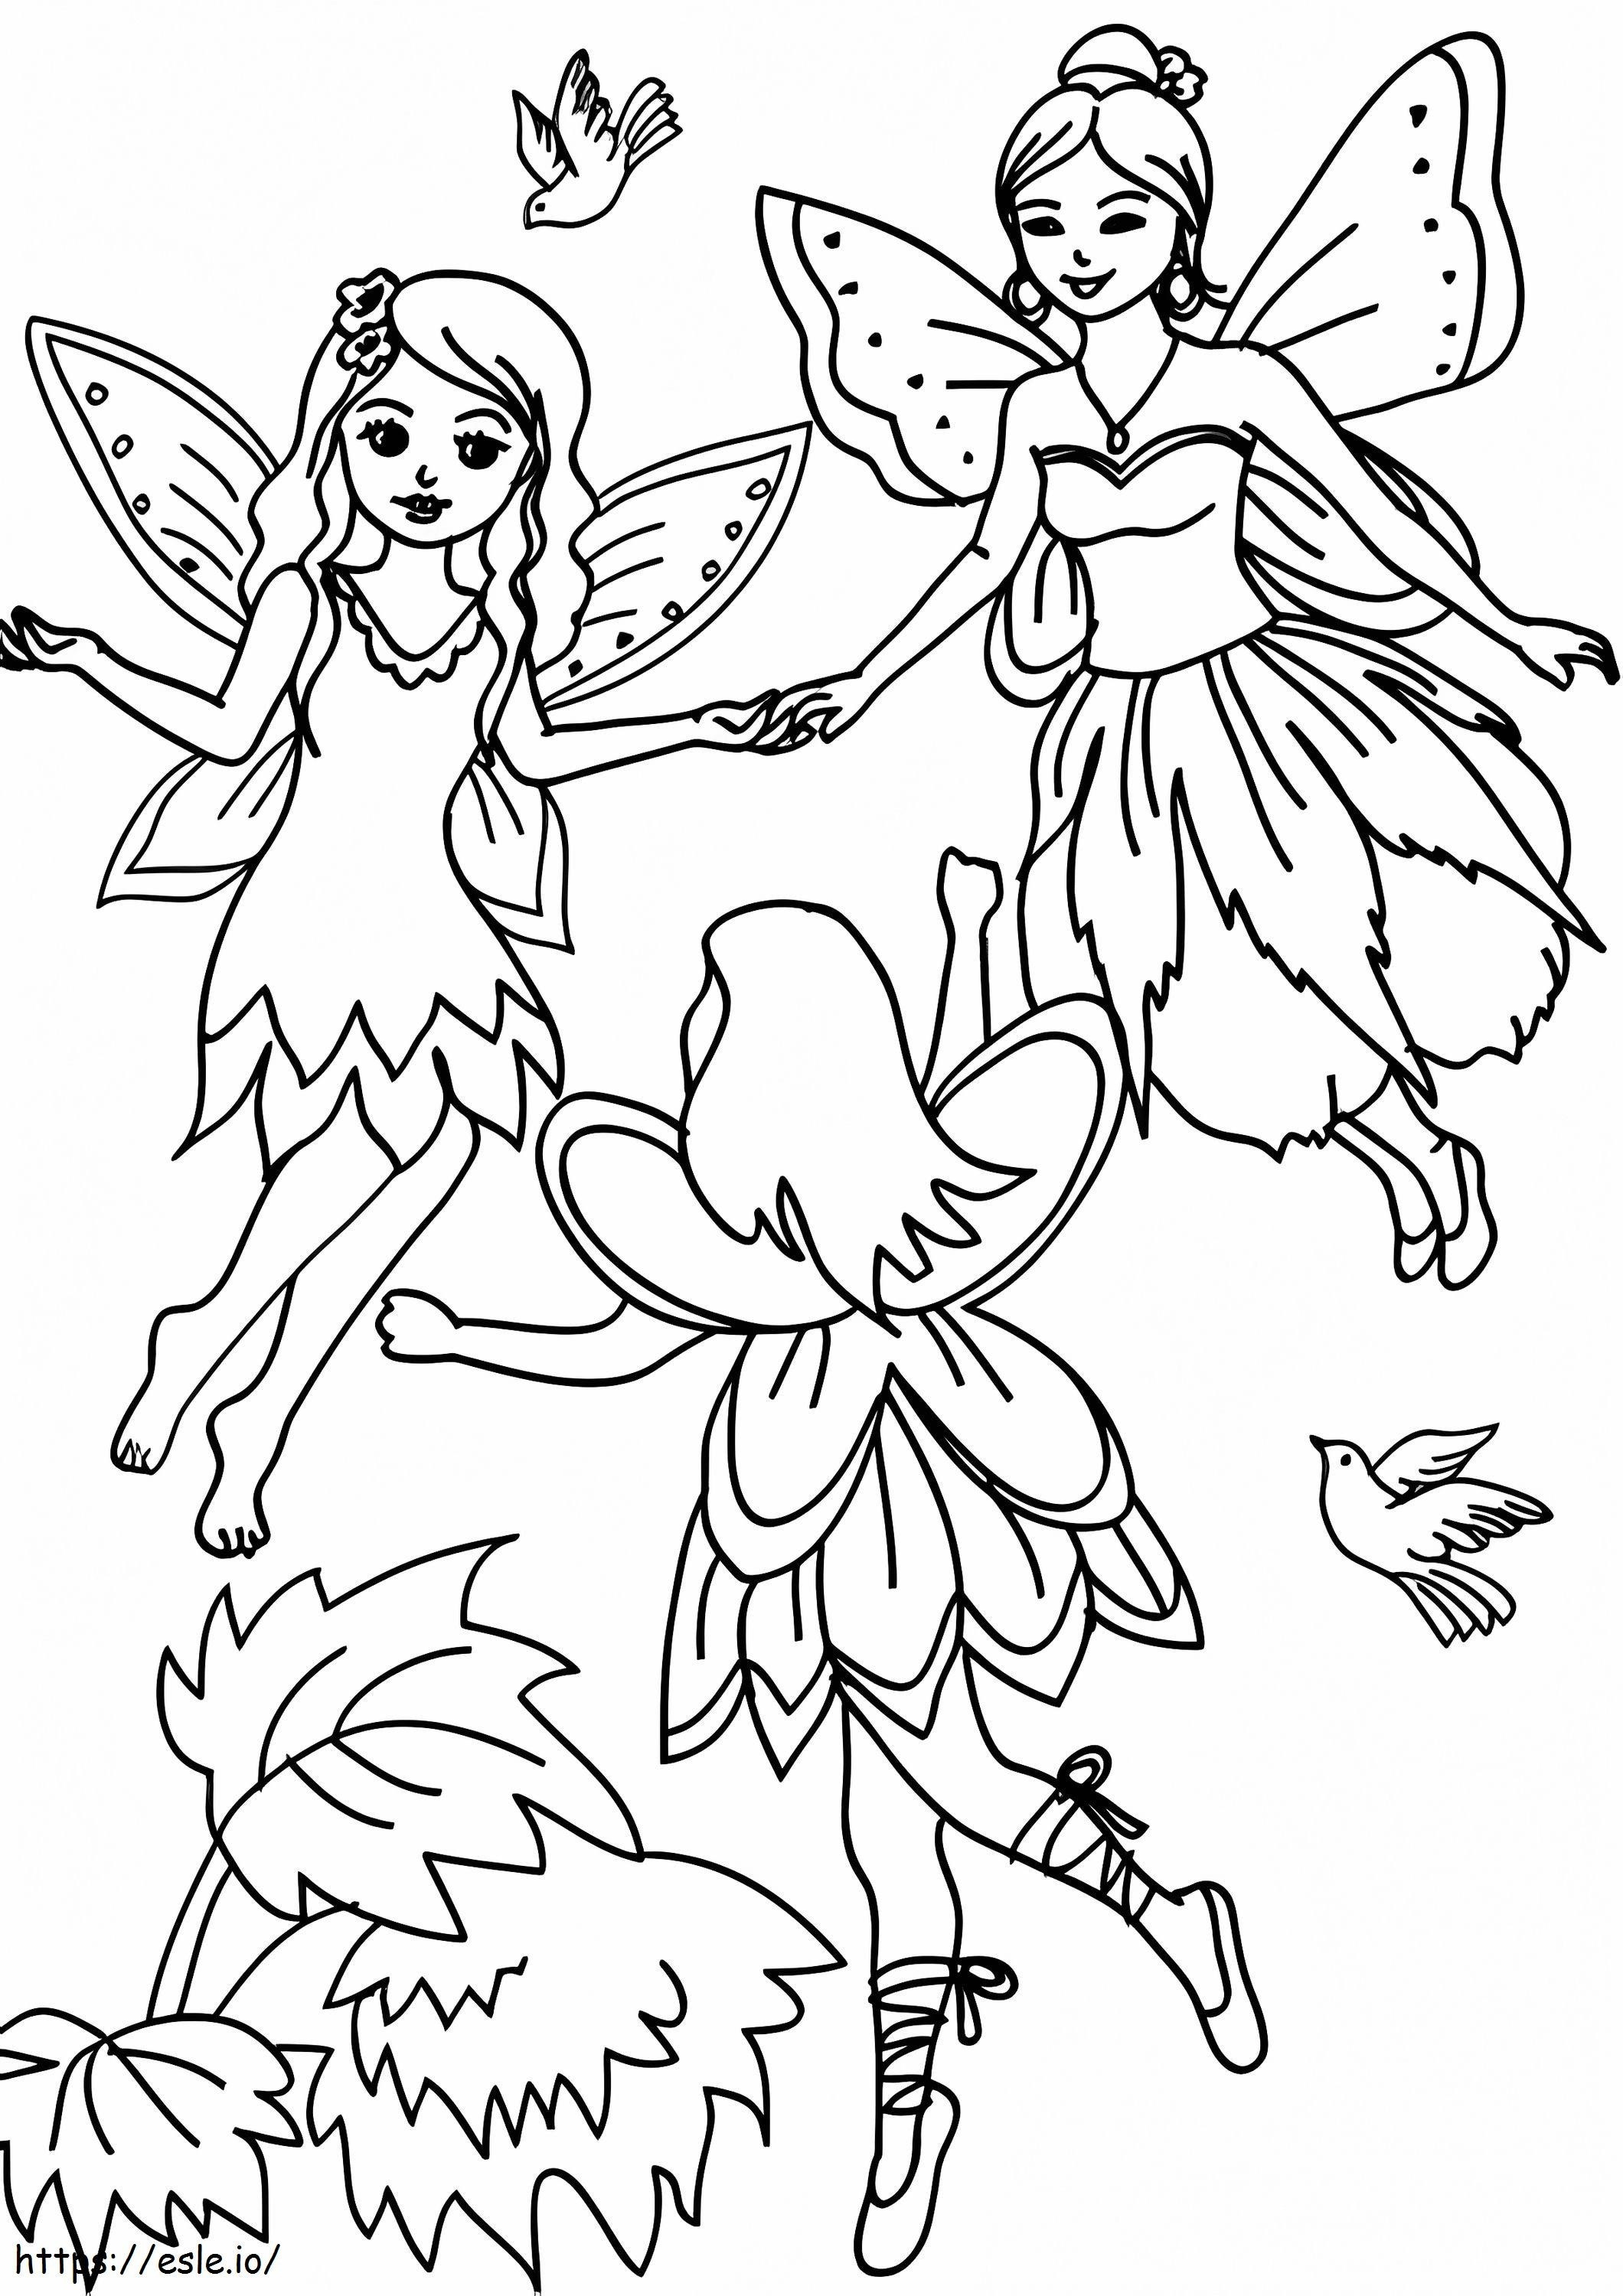 Three Fairies coloring page